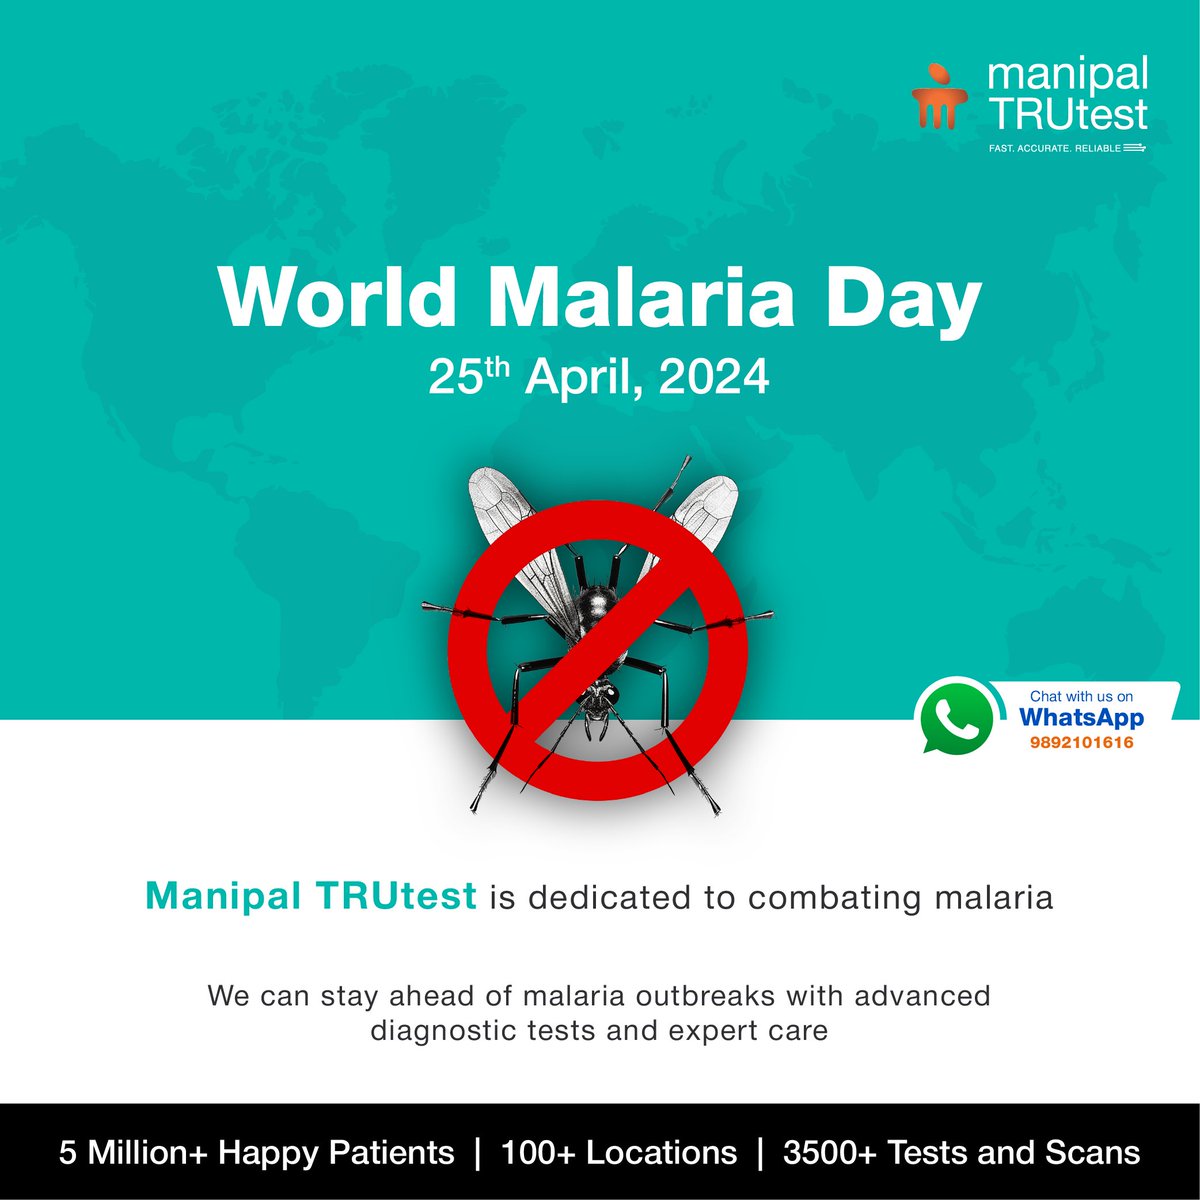 Today, on World Malaria Day, let's unite in the fight against this deadly disease. Let's raise awareness, support research, and take action to end malaria for good. 

Explore our services! Click: shorturl.at/enL03
#worldmalariaday #malaria #bloodtest #ManipalTrutest #health